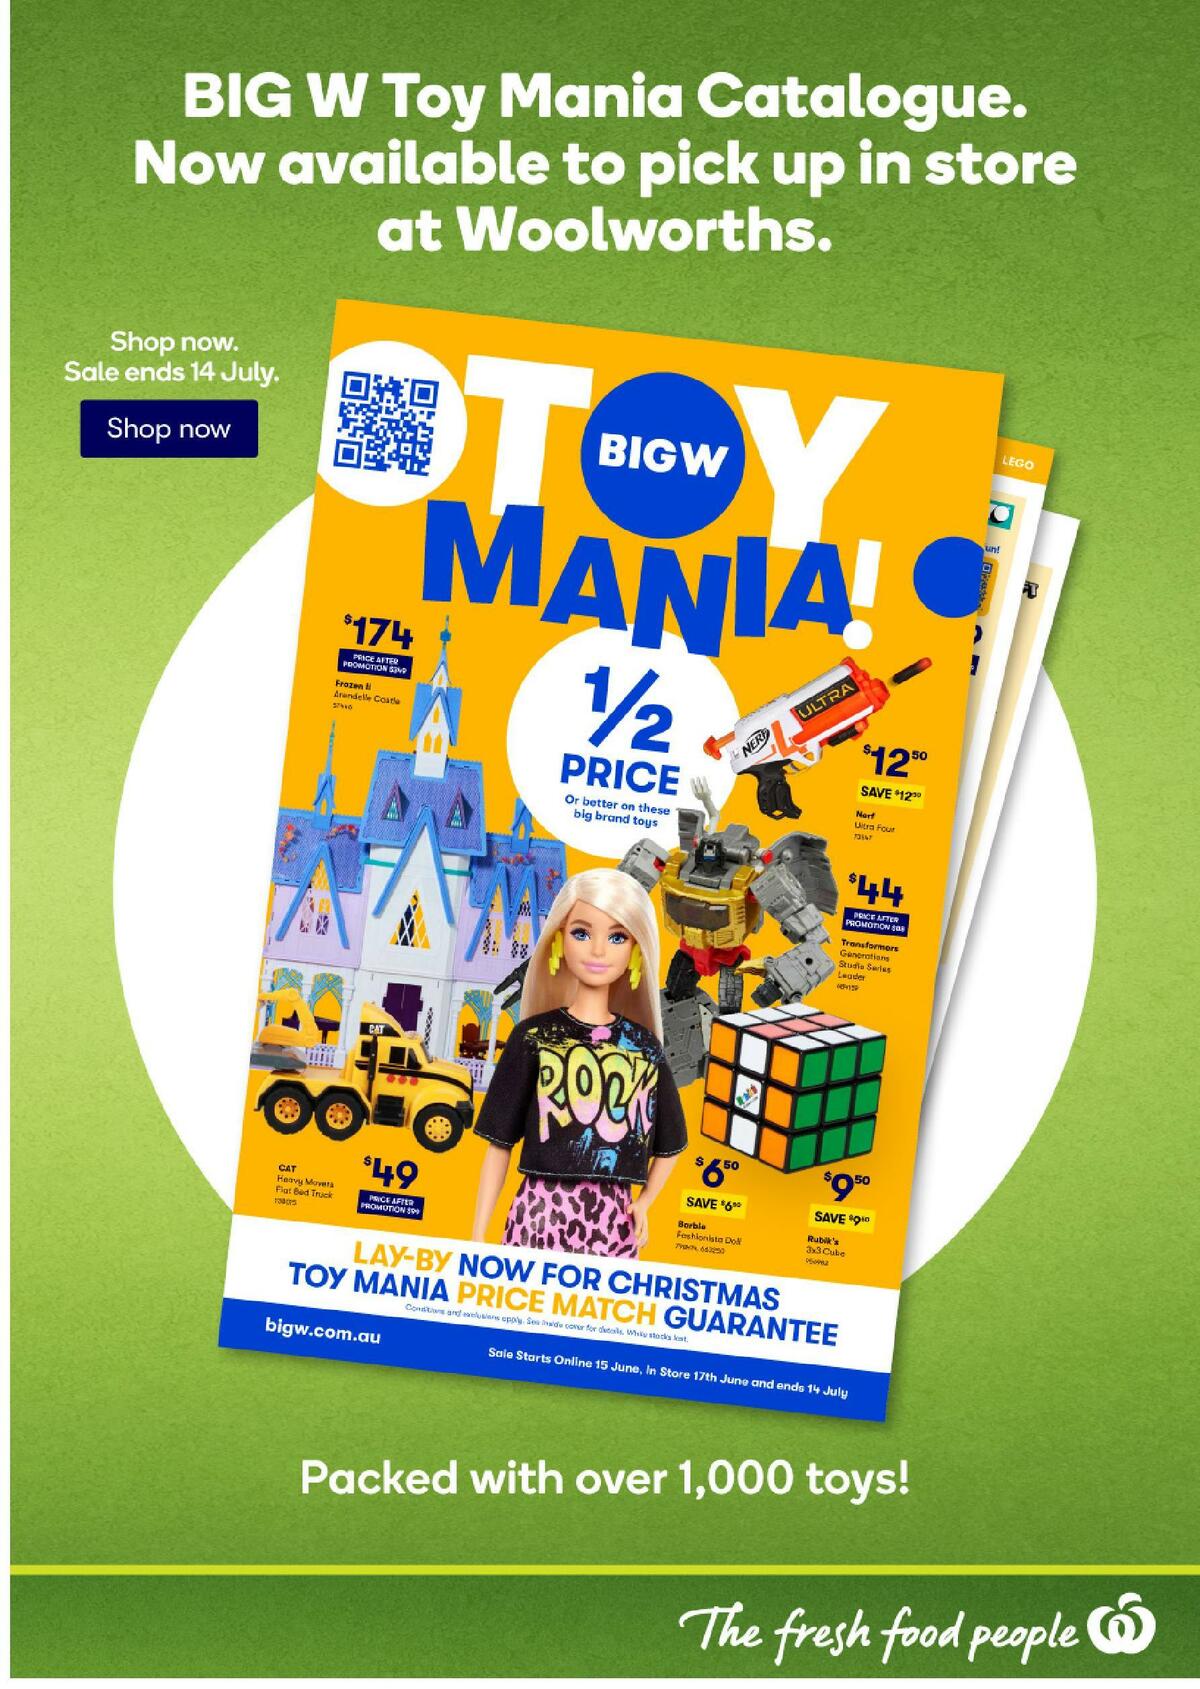 Big W Even More Toy Mania! Catalogues from 15 June